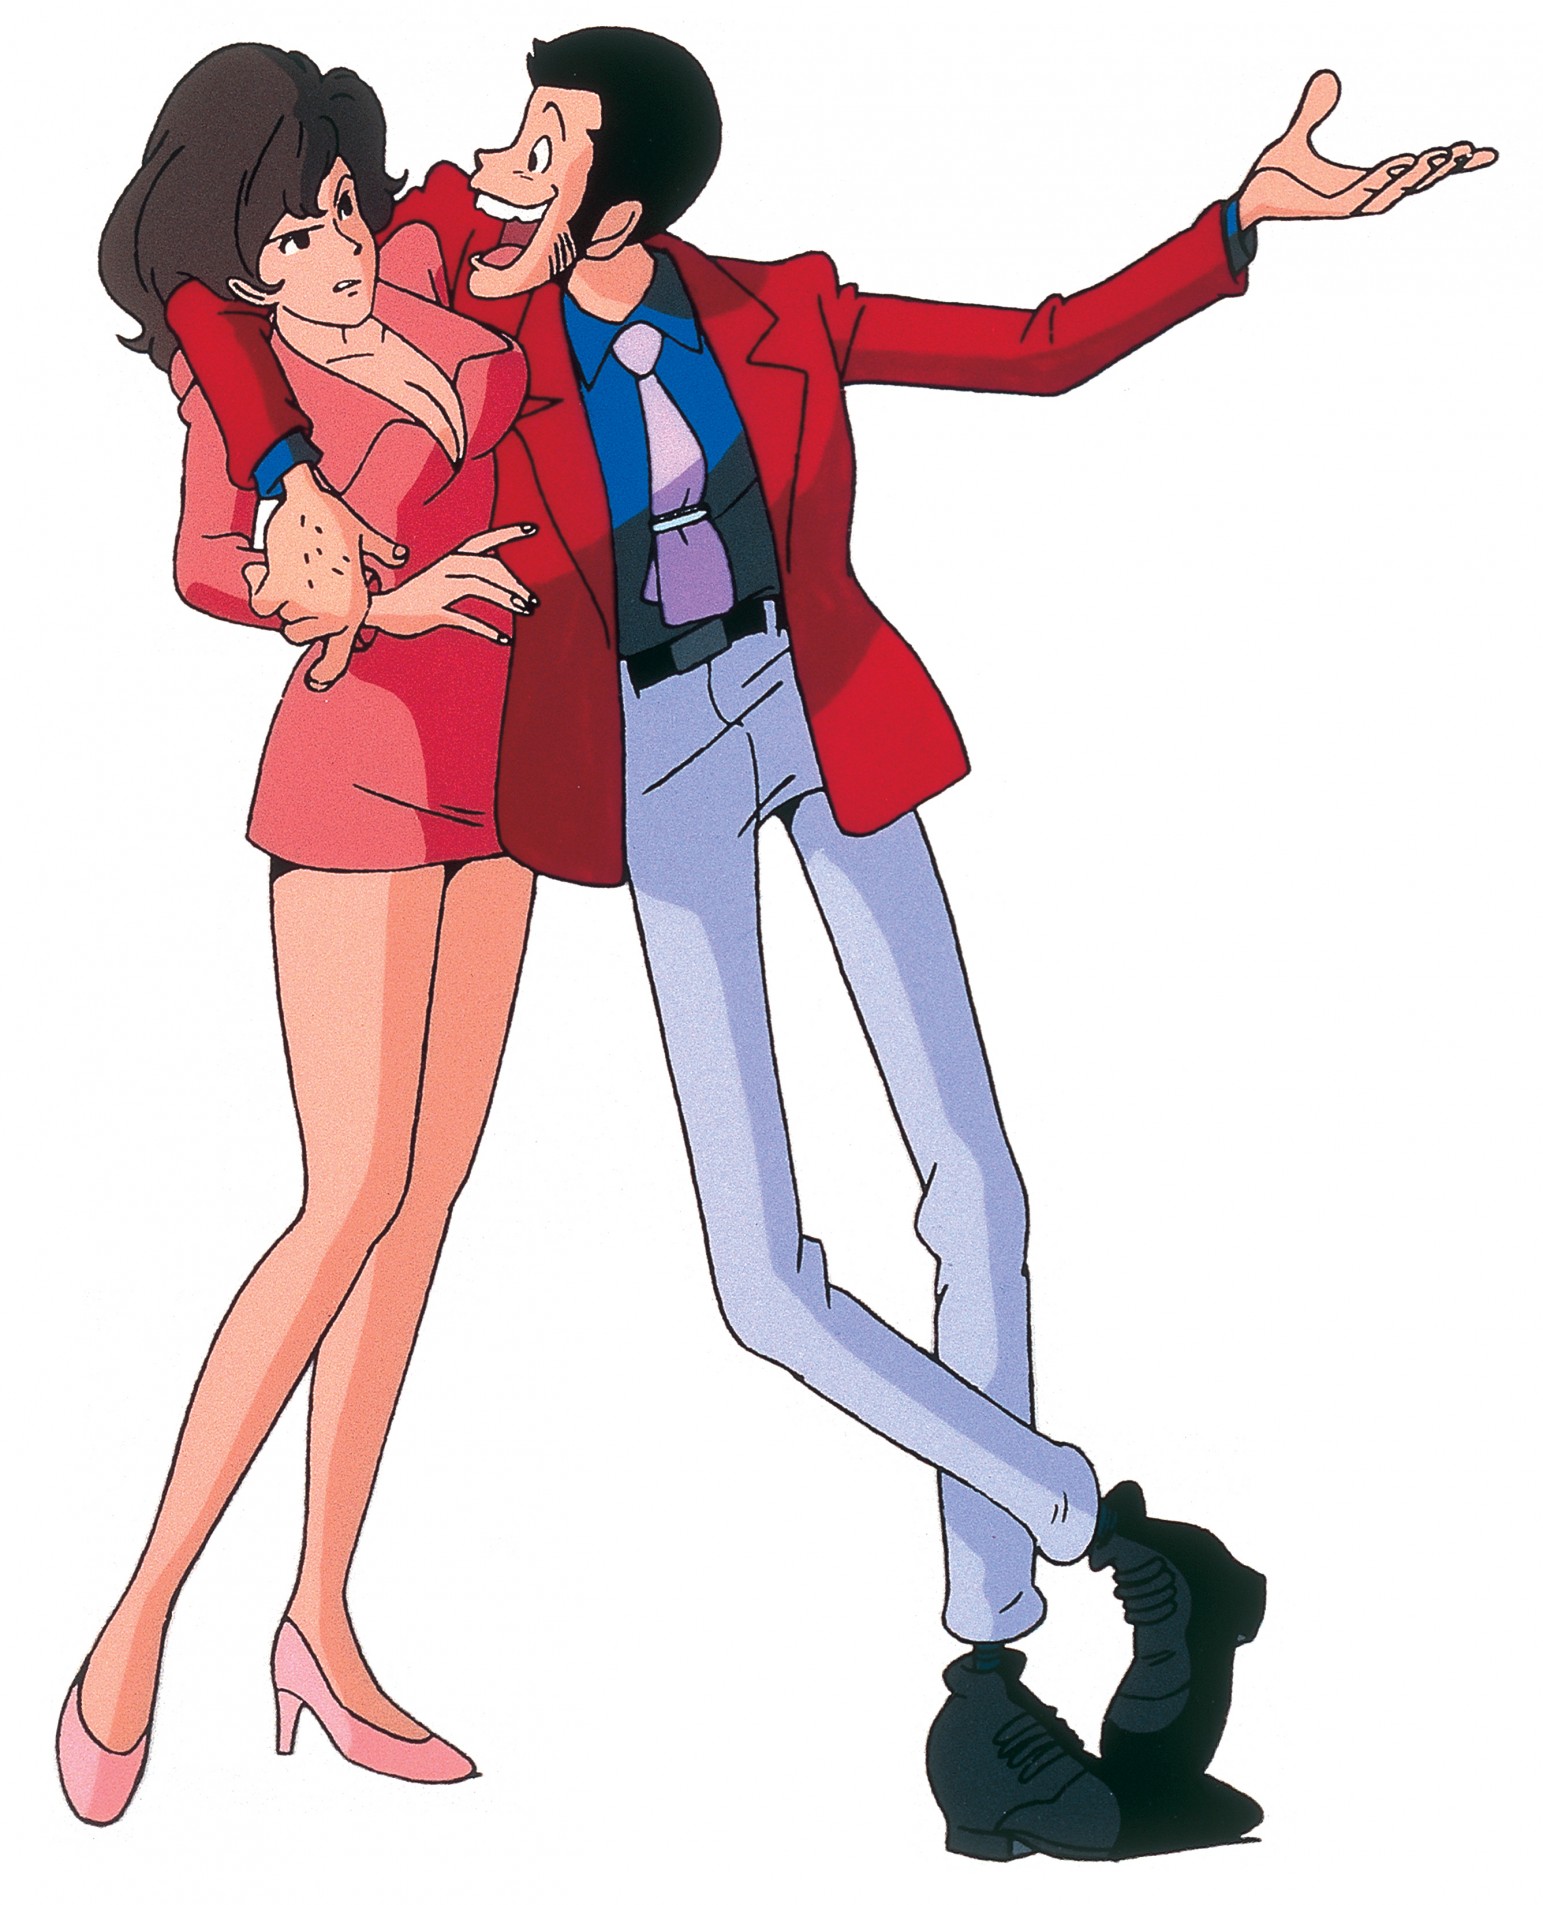 Lupin The 3rd #4